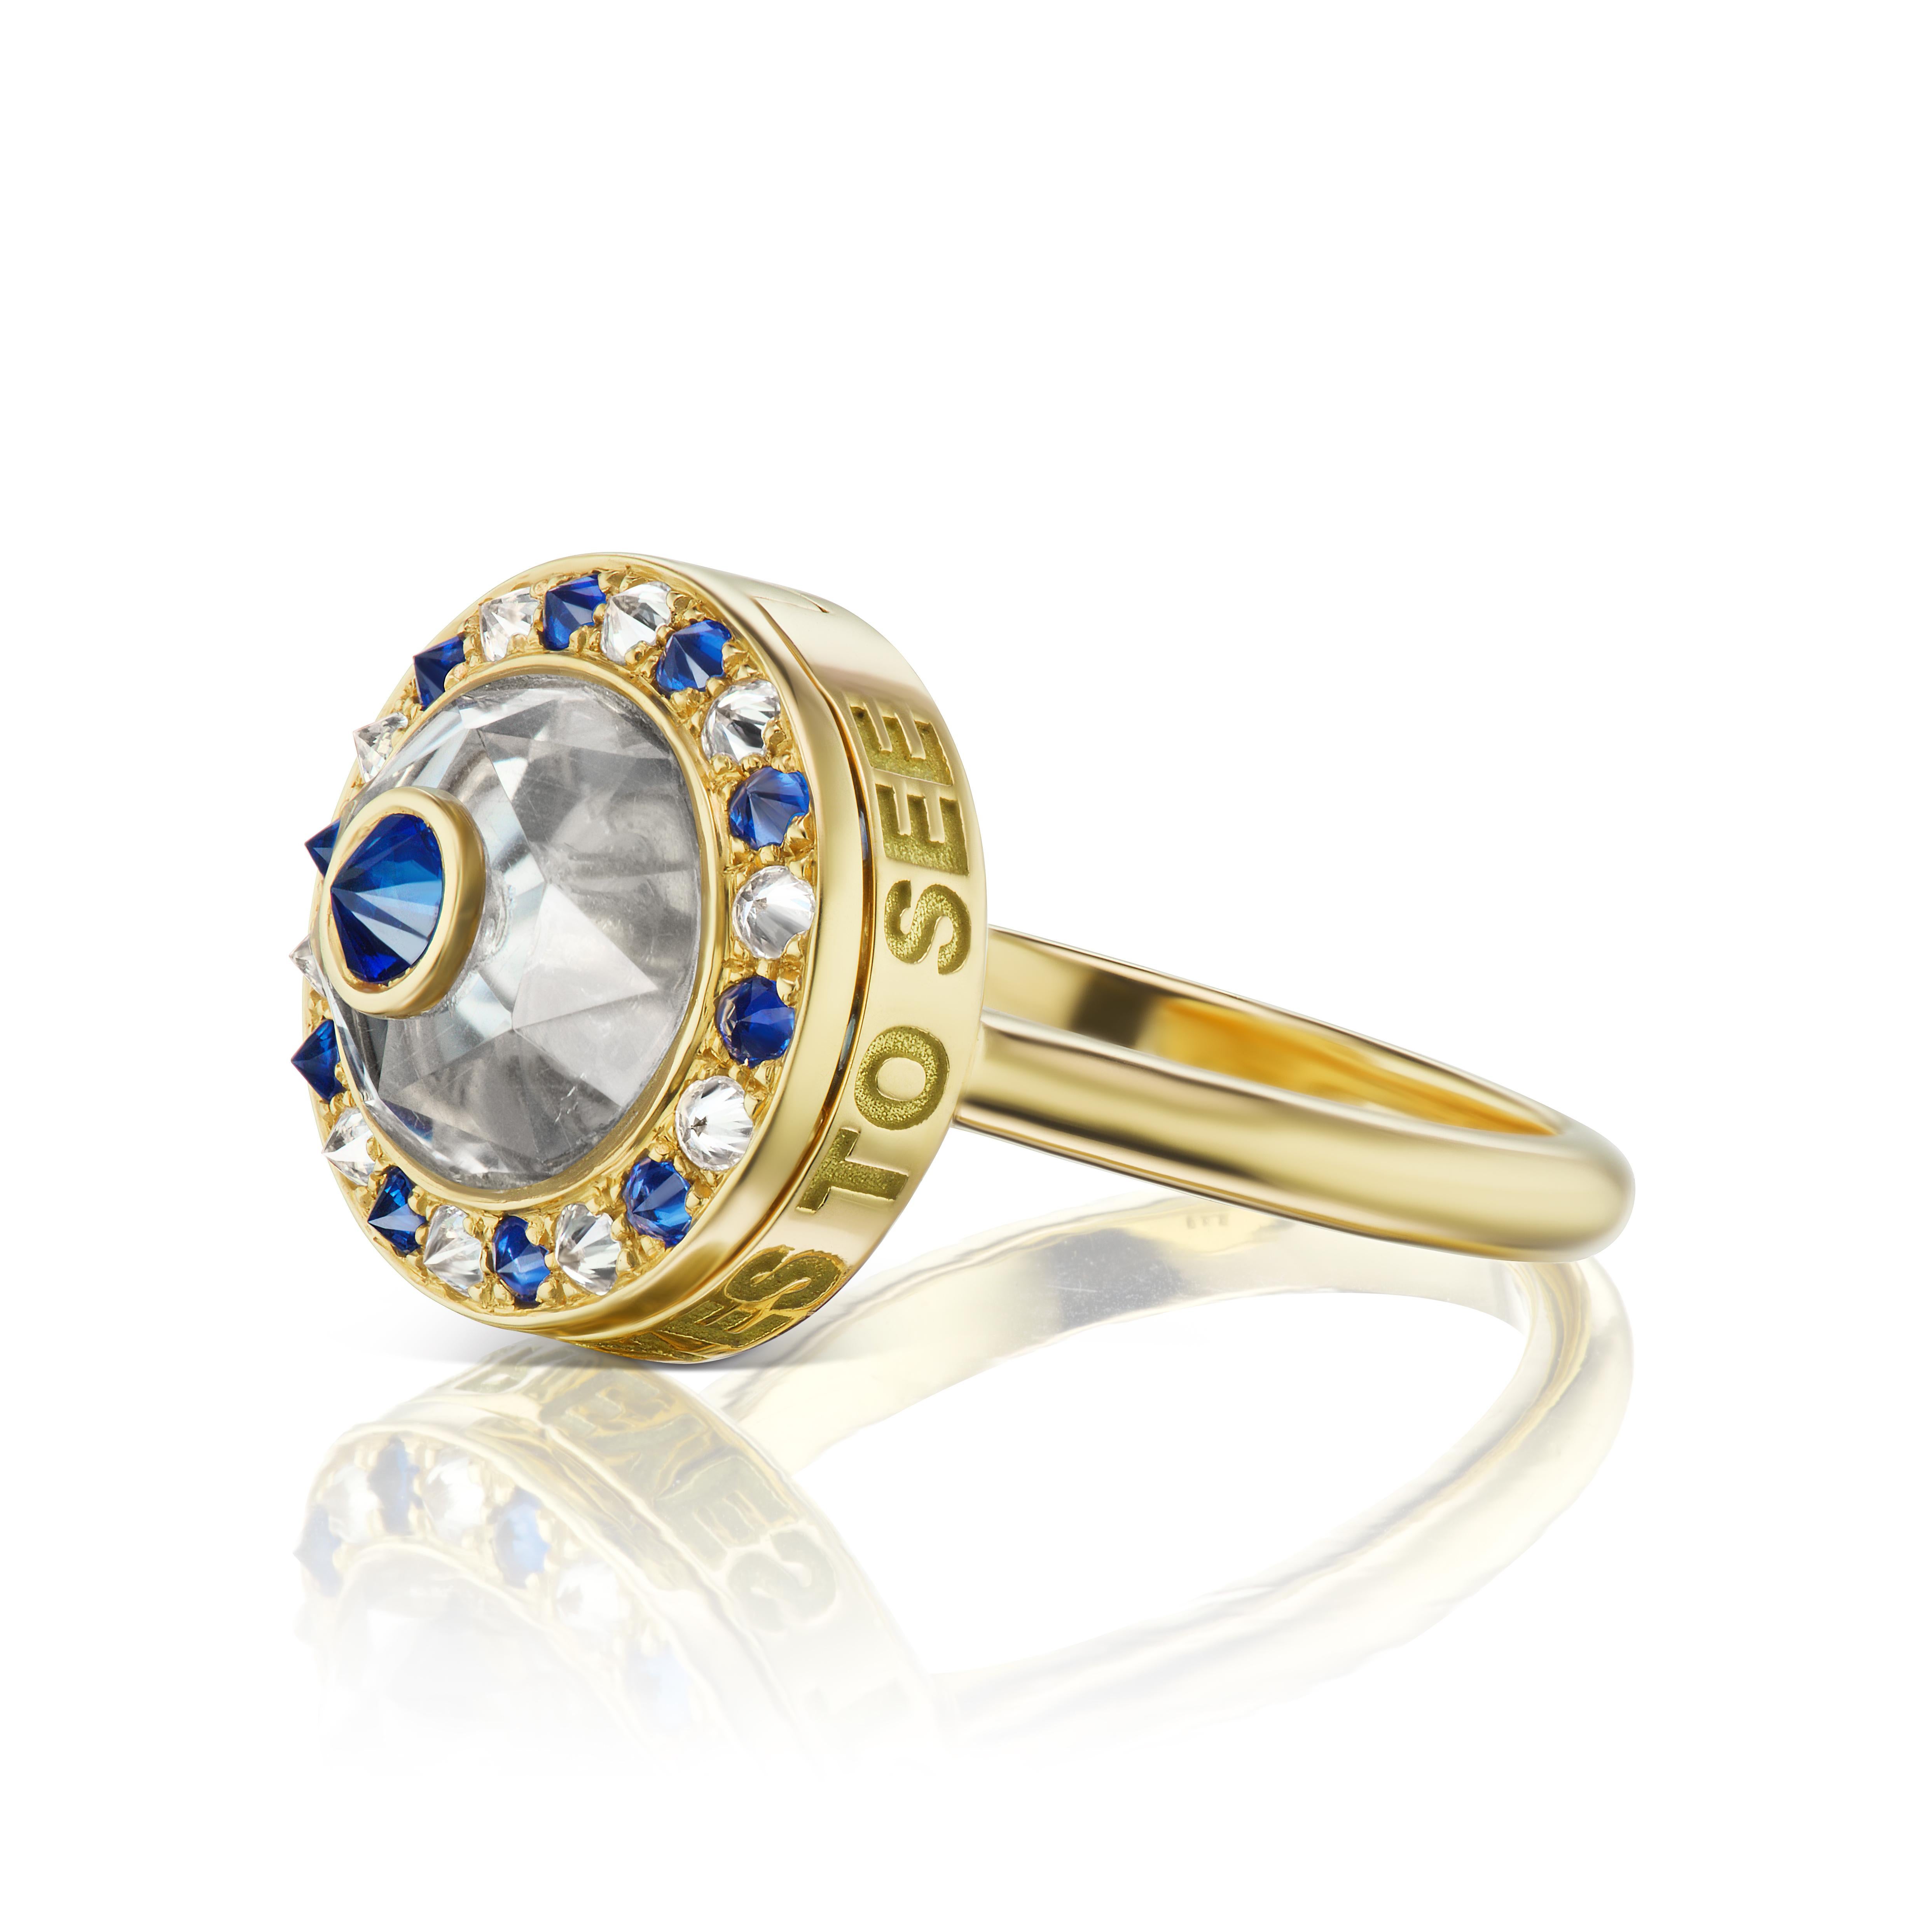 Ana-Katarina’s Eye Love Locket Ring is inspired by antique poison rings and her love of secrets. When closed, the Eye Love Locket is a beautiful work of art. A hand-carved quartz crystal rises in a faceted dome and is finished with an inverted